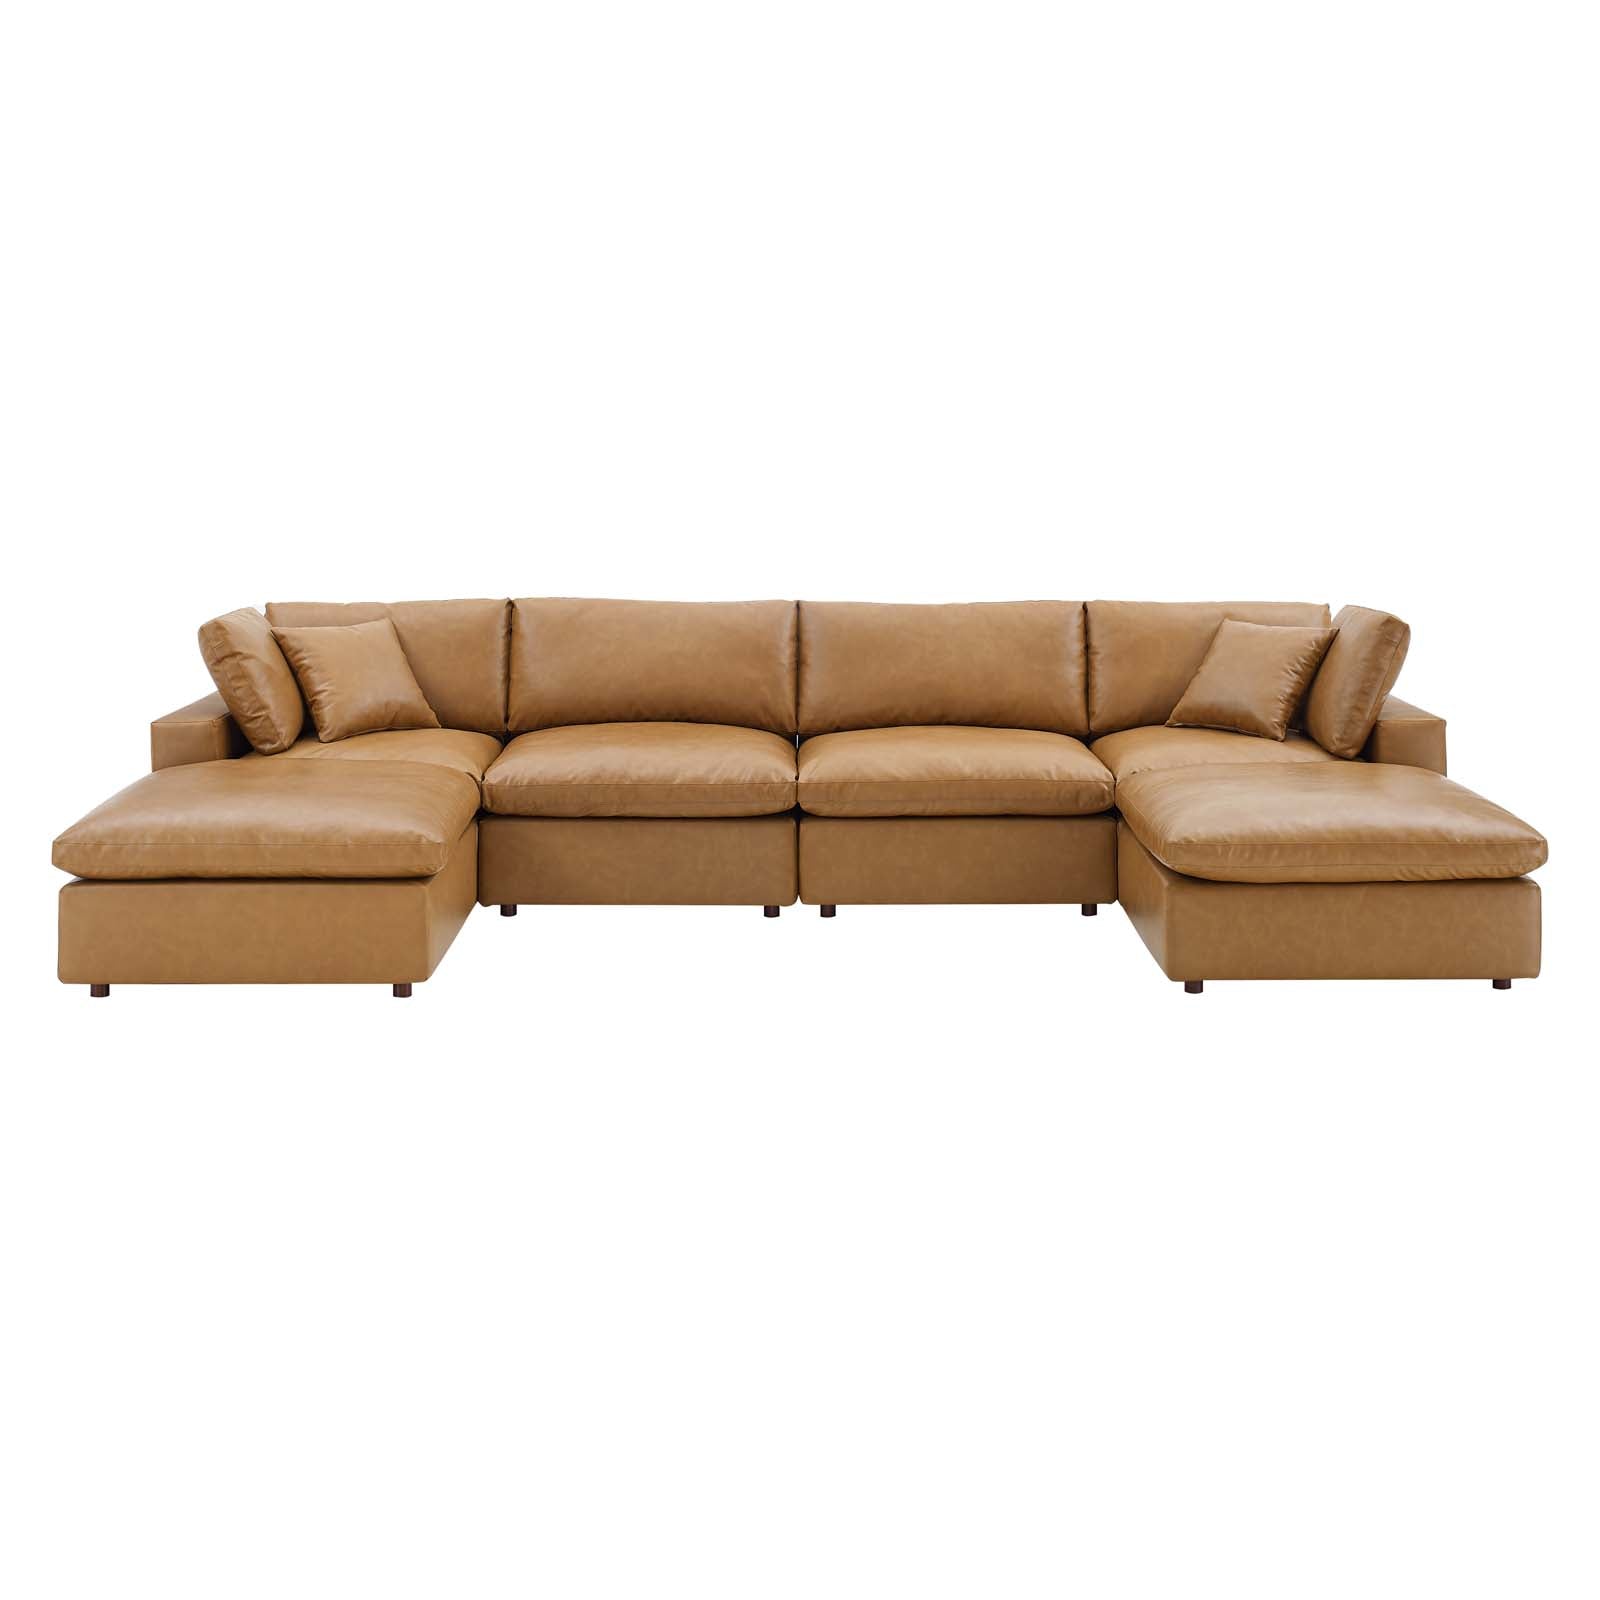 Modway Sectional Sofas - Commix Down Filled Overstuffed Vegan Leather 6 Piece Sectional Sofa Tan 79"D